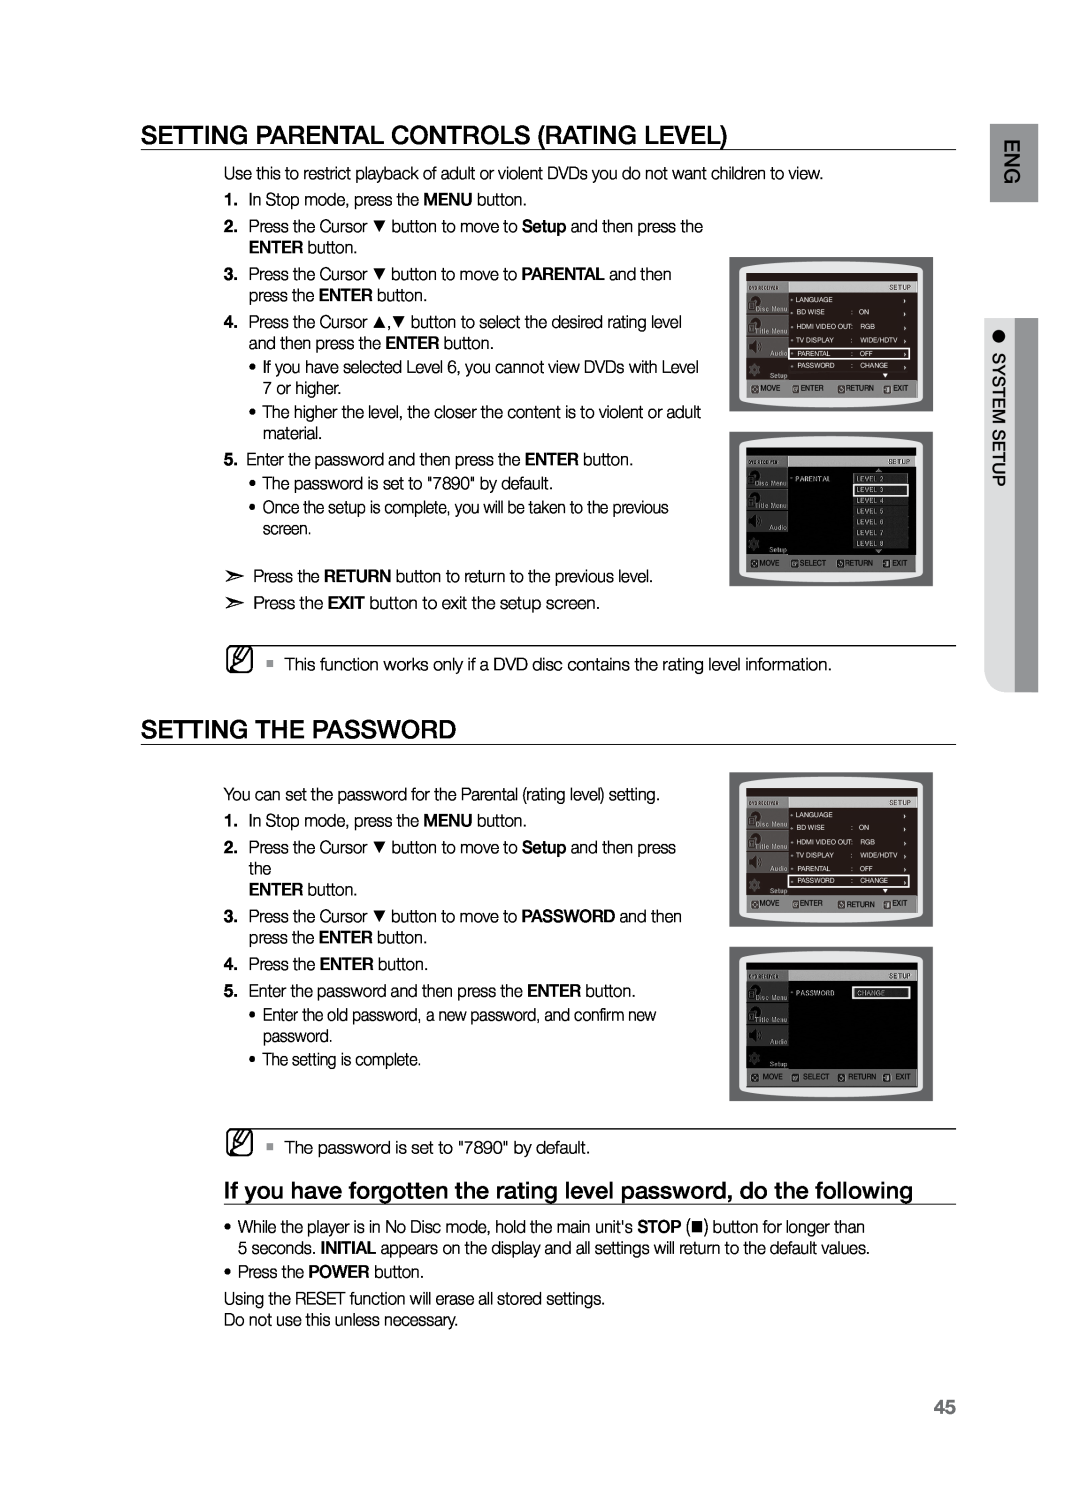 Samsung HT-Z221 user manual Setting Parental Controls Rating Level, Setting the Password, press the ENTER button, or higher 